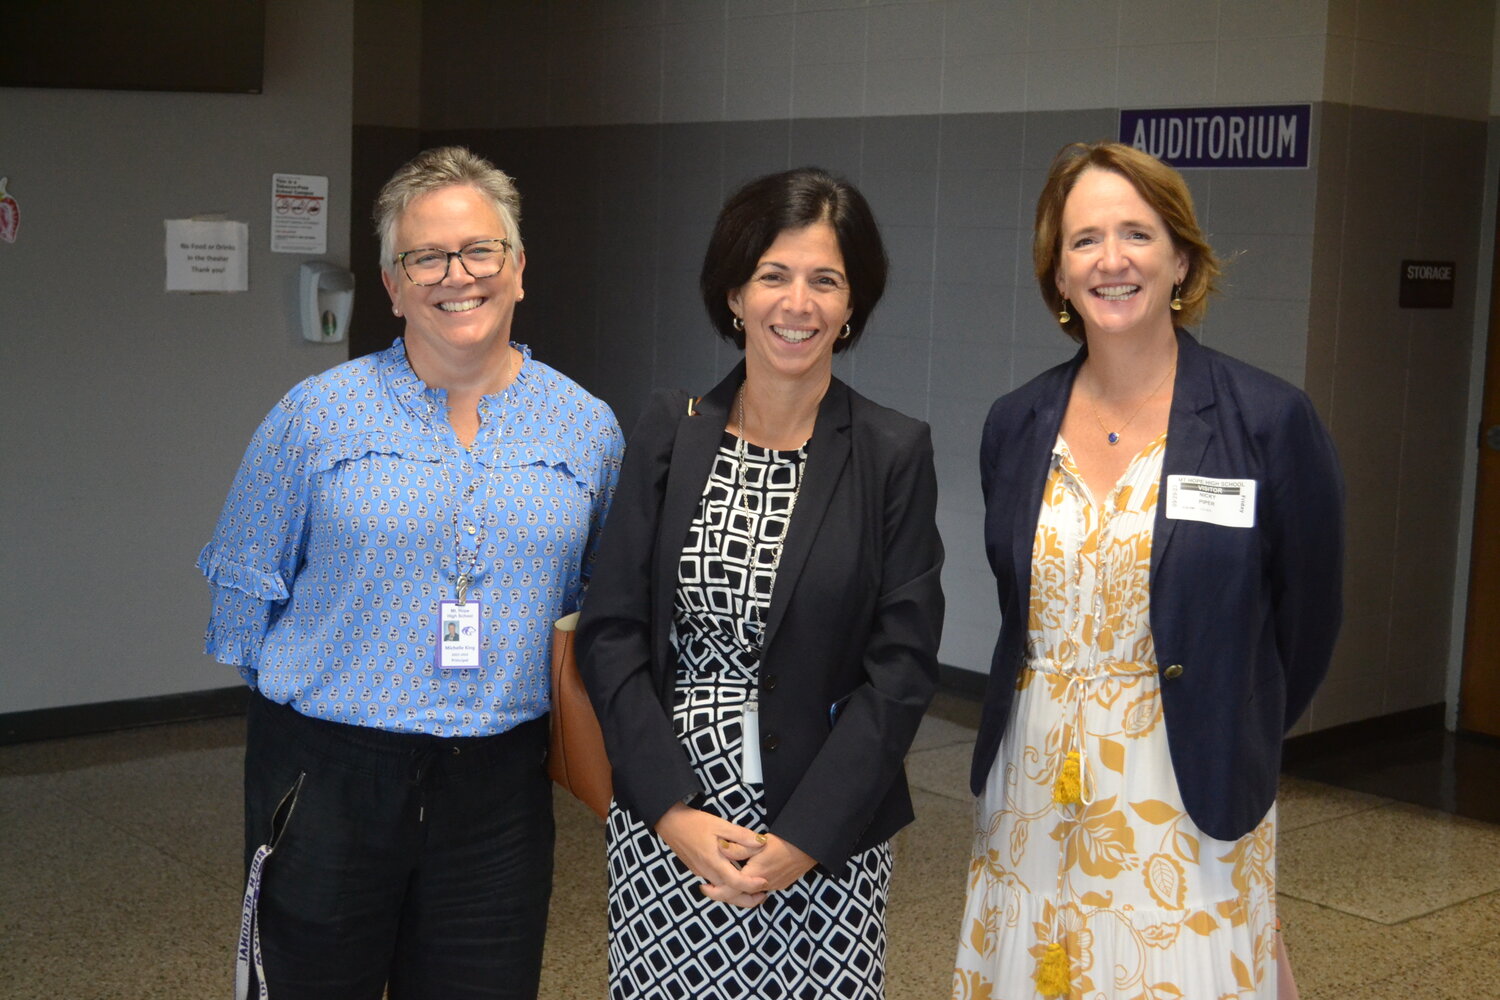 Mt. Hope Principal Michelle King, Superintendent Ana Riley, and School Committee Chairperson Nicky Piper provided a tour of the building this past Friday to discuss why they feel a $200 million bond is necessary for the district.